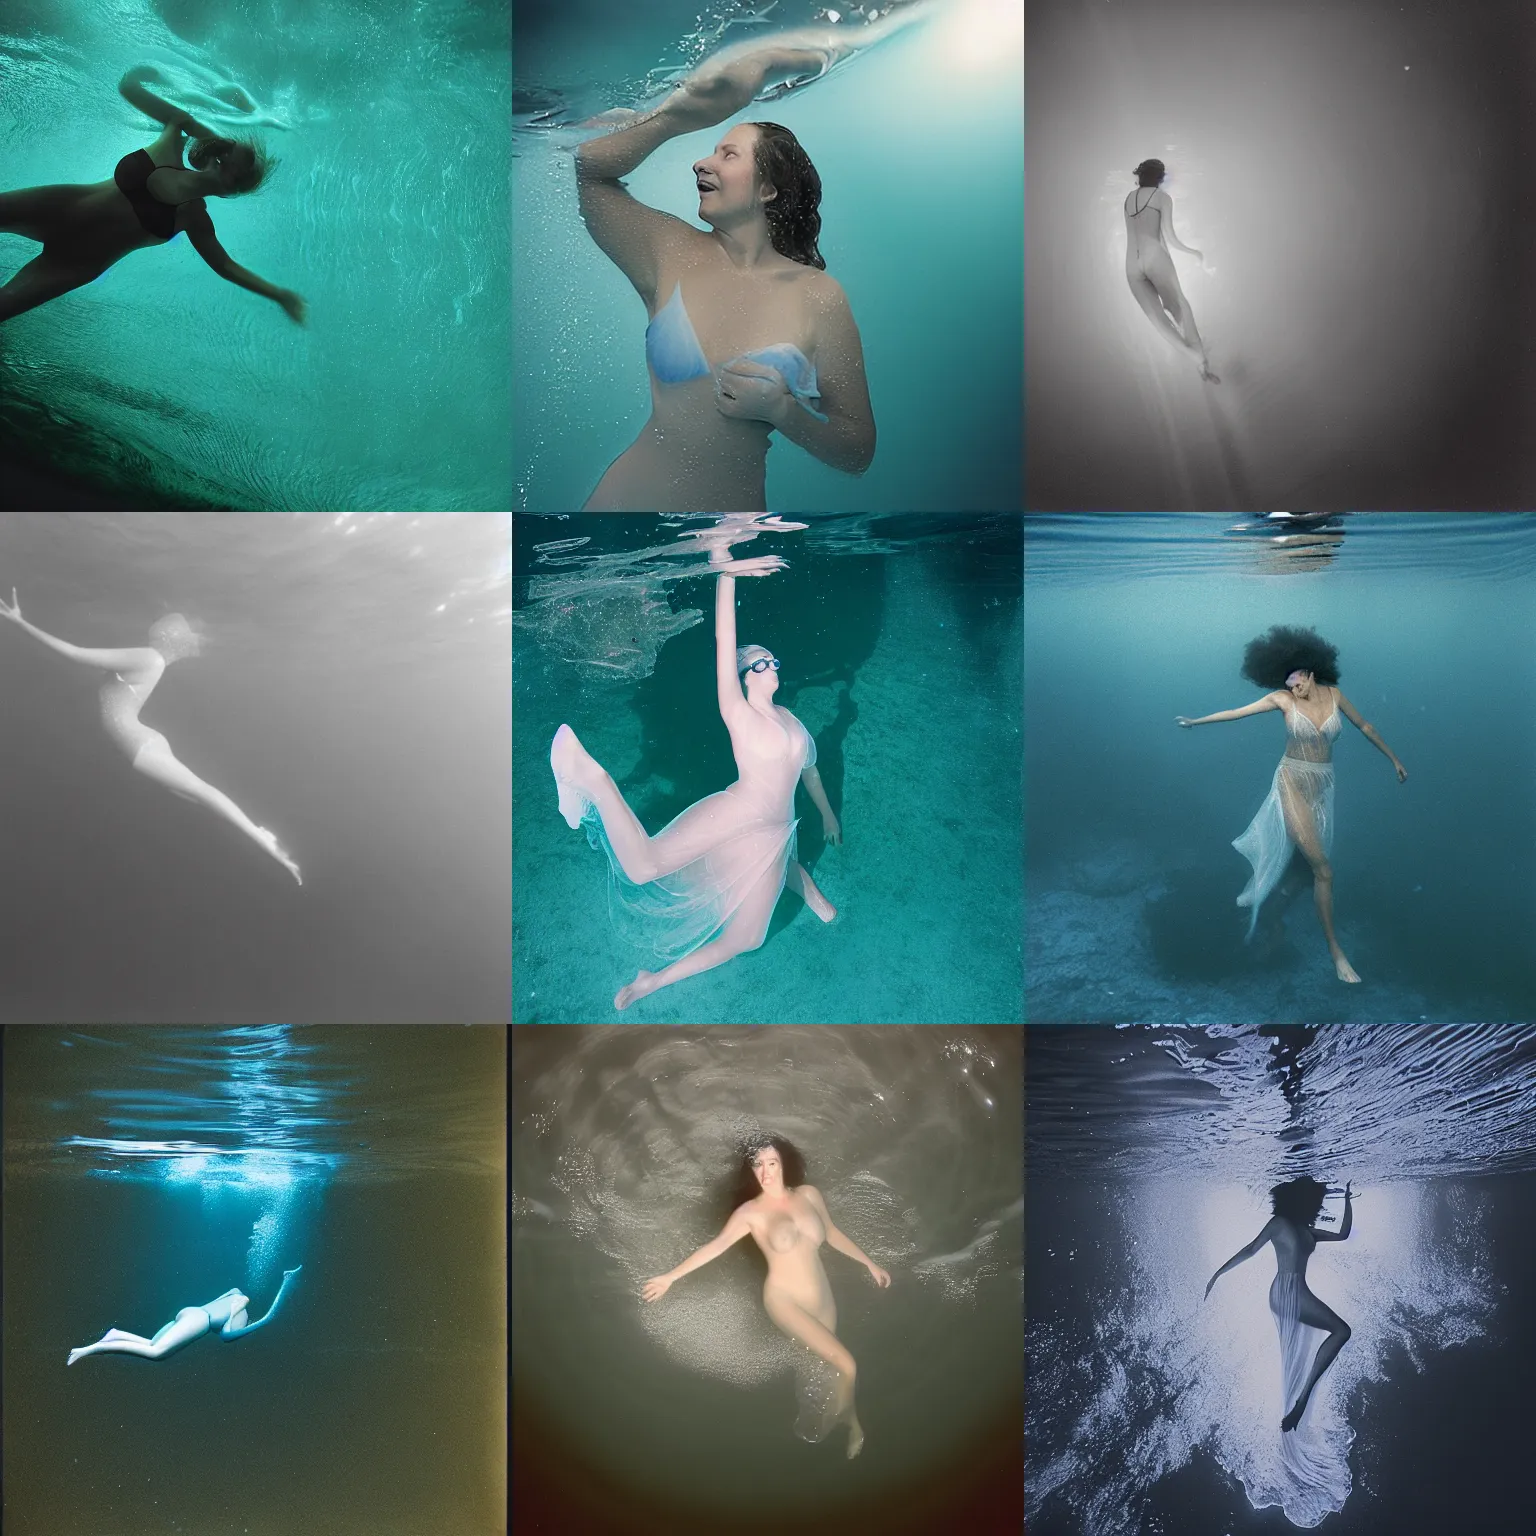 Prompt: A Medium format still image of a woman swimming towards the surface in a flowing gown at night. She is swimming with moon jelly fish, medium format photograph, single-point source lighting from above.